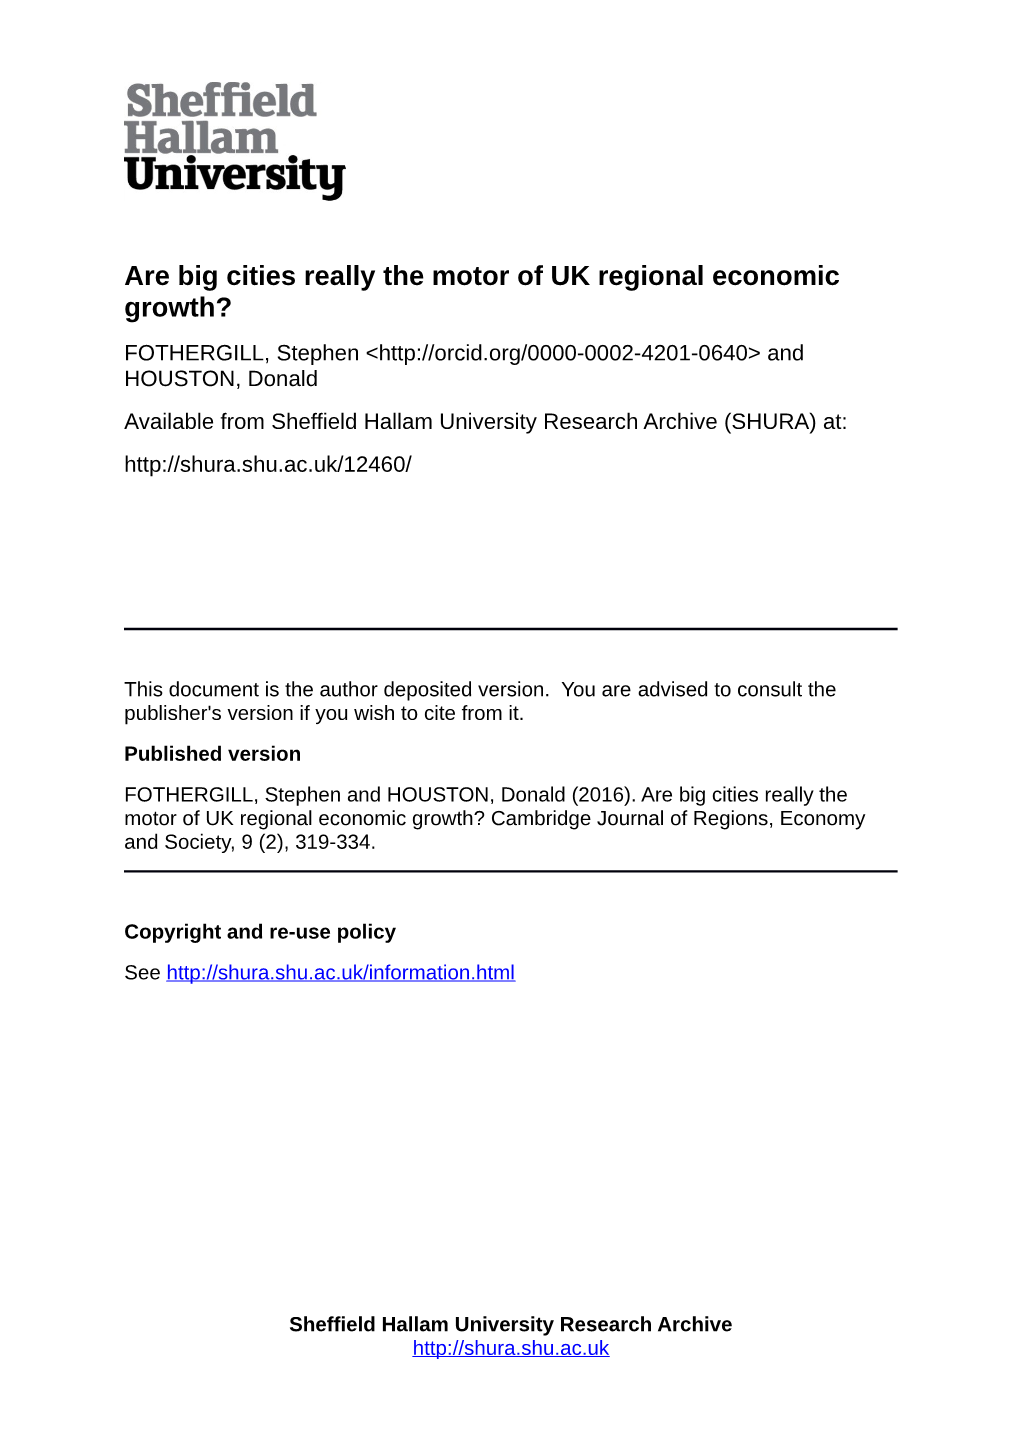 Are Big Cities Really the Motor of UK Regional Economic Growth?